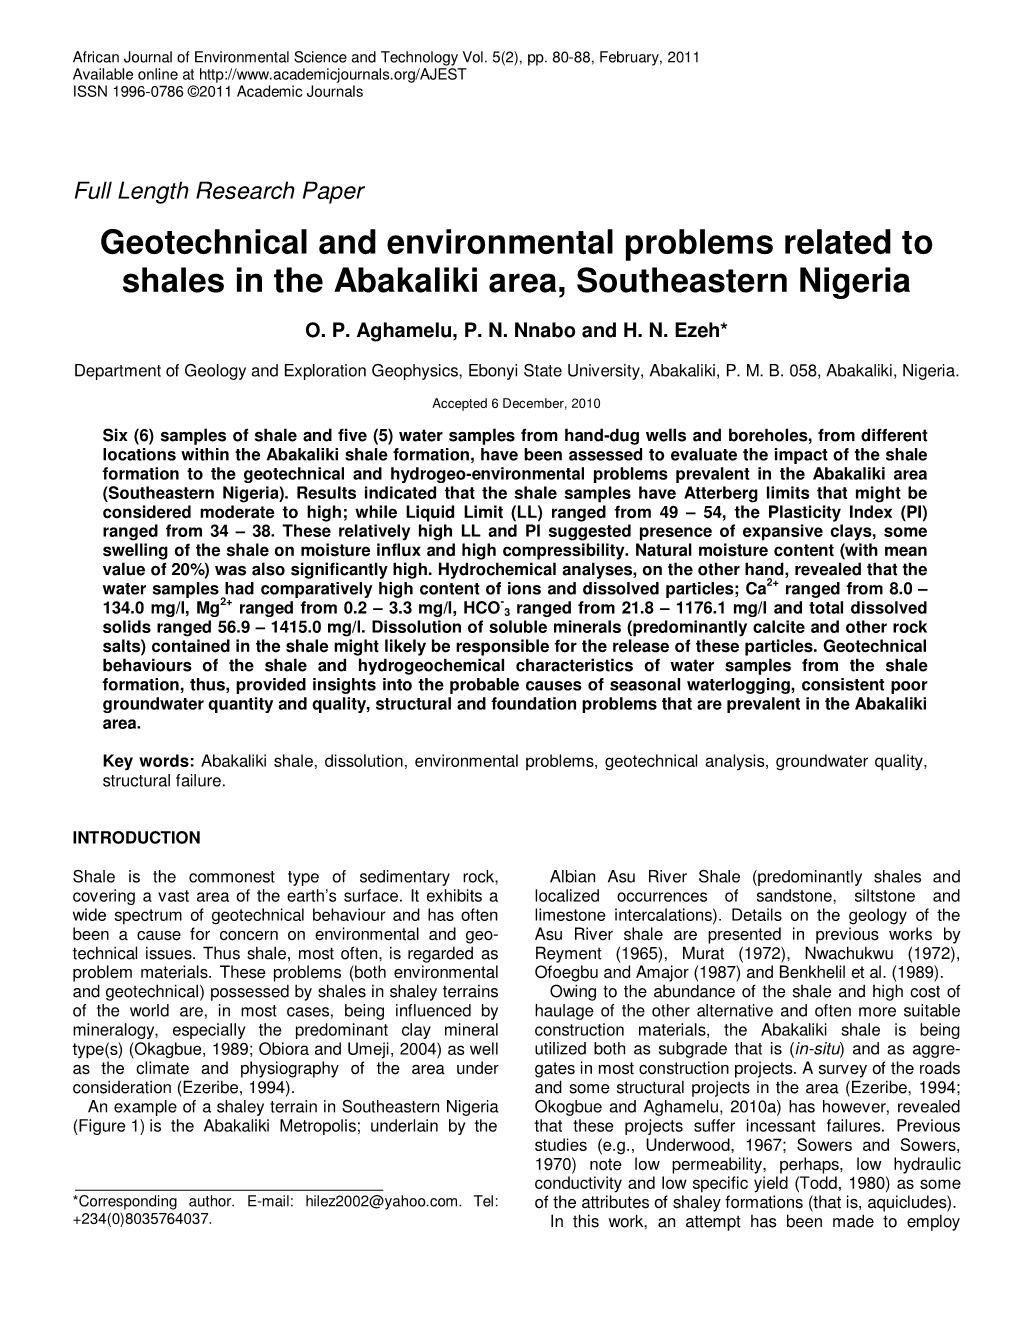 Geotechnical and Environmental Problems Related to Shales in the Abakaliki Area, Southeastern Nigeria